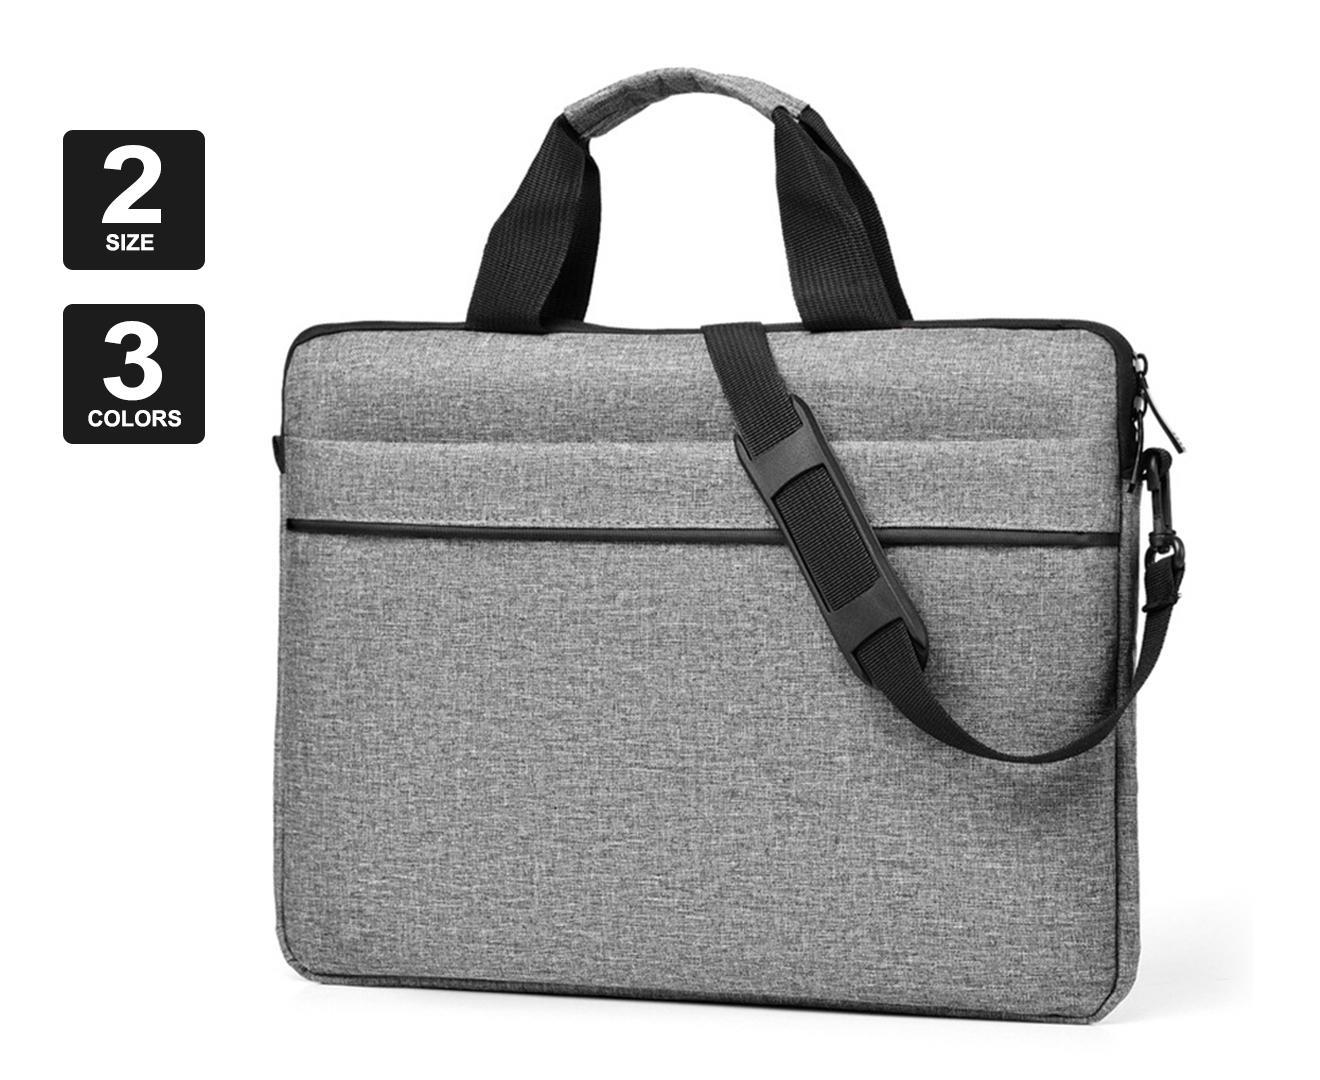 Vivva Laptop Sleeve Carry Case Cover Bag For Macbook HP Dell 14" Notebook - Grey